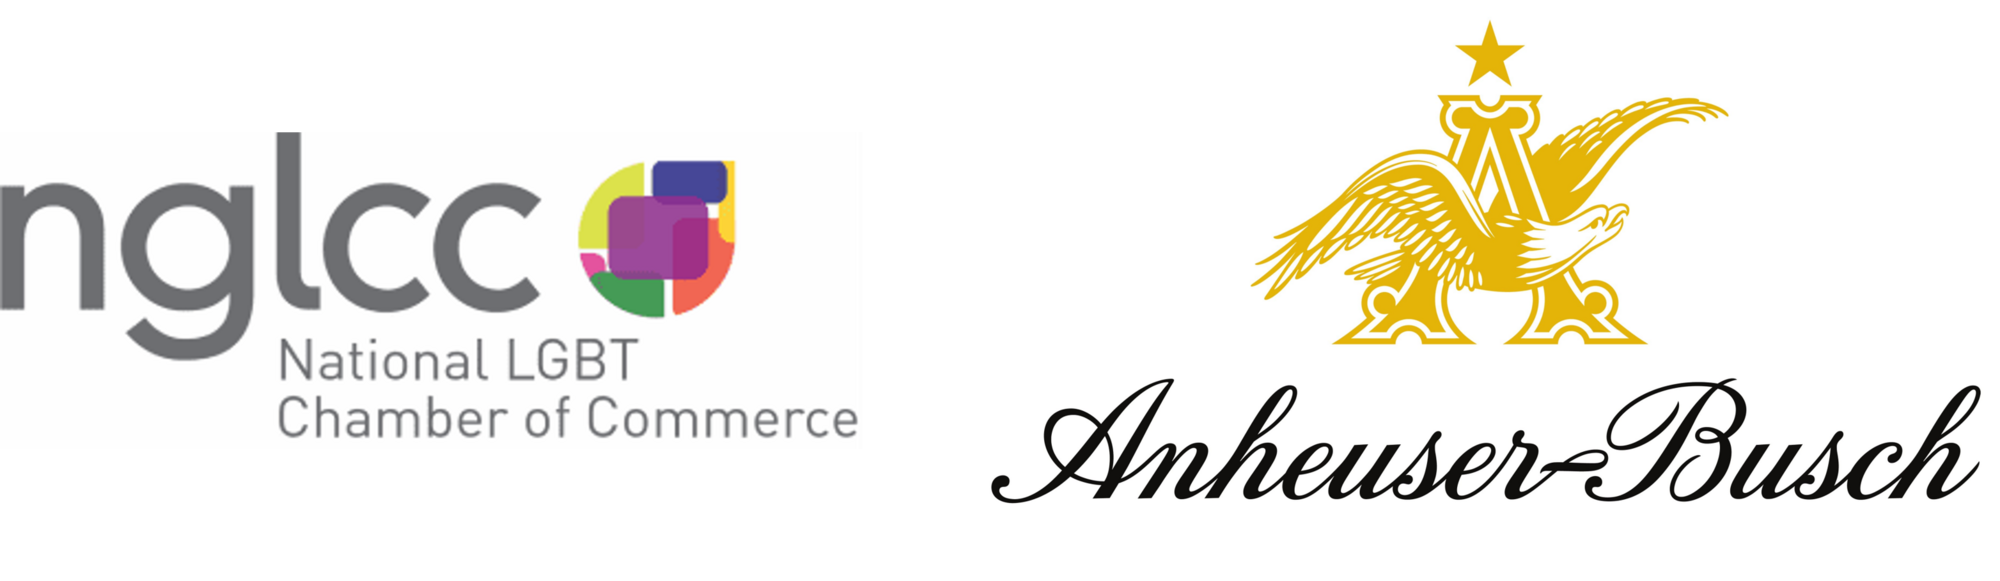 National LGBT Chamber of Commerce and Anheuser-Busch Continue Support of LGBTQ+ Owned Small Businesses Across America